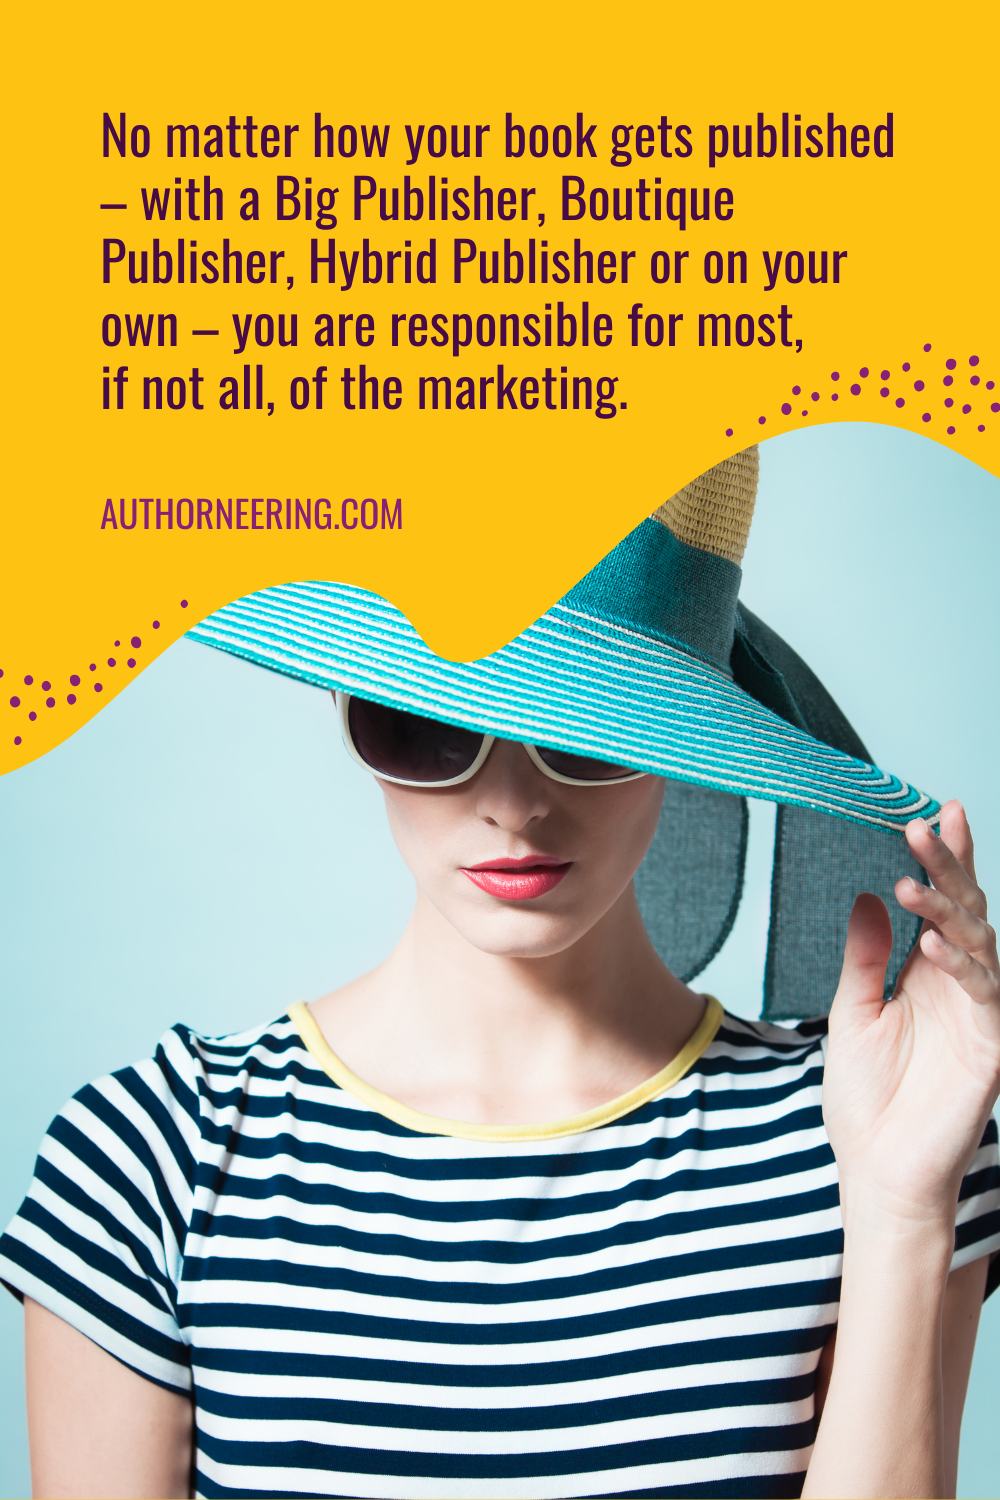 You Are Responsible for Marketing Your Book